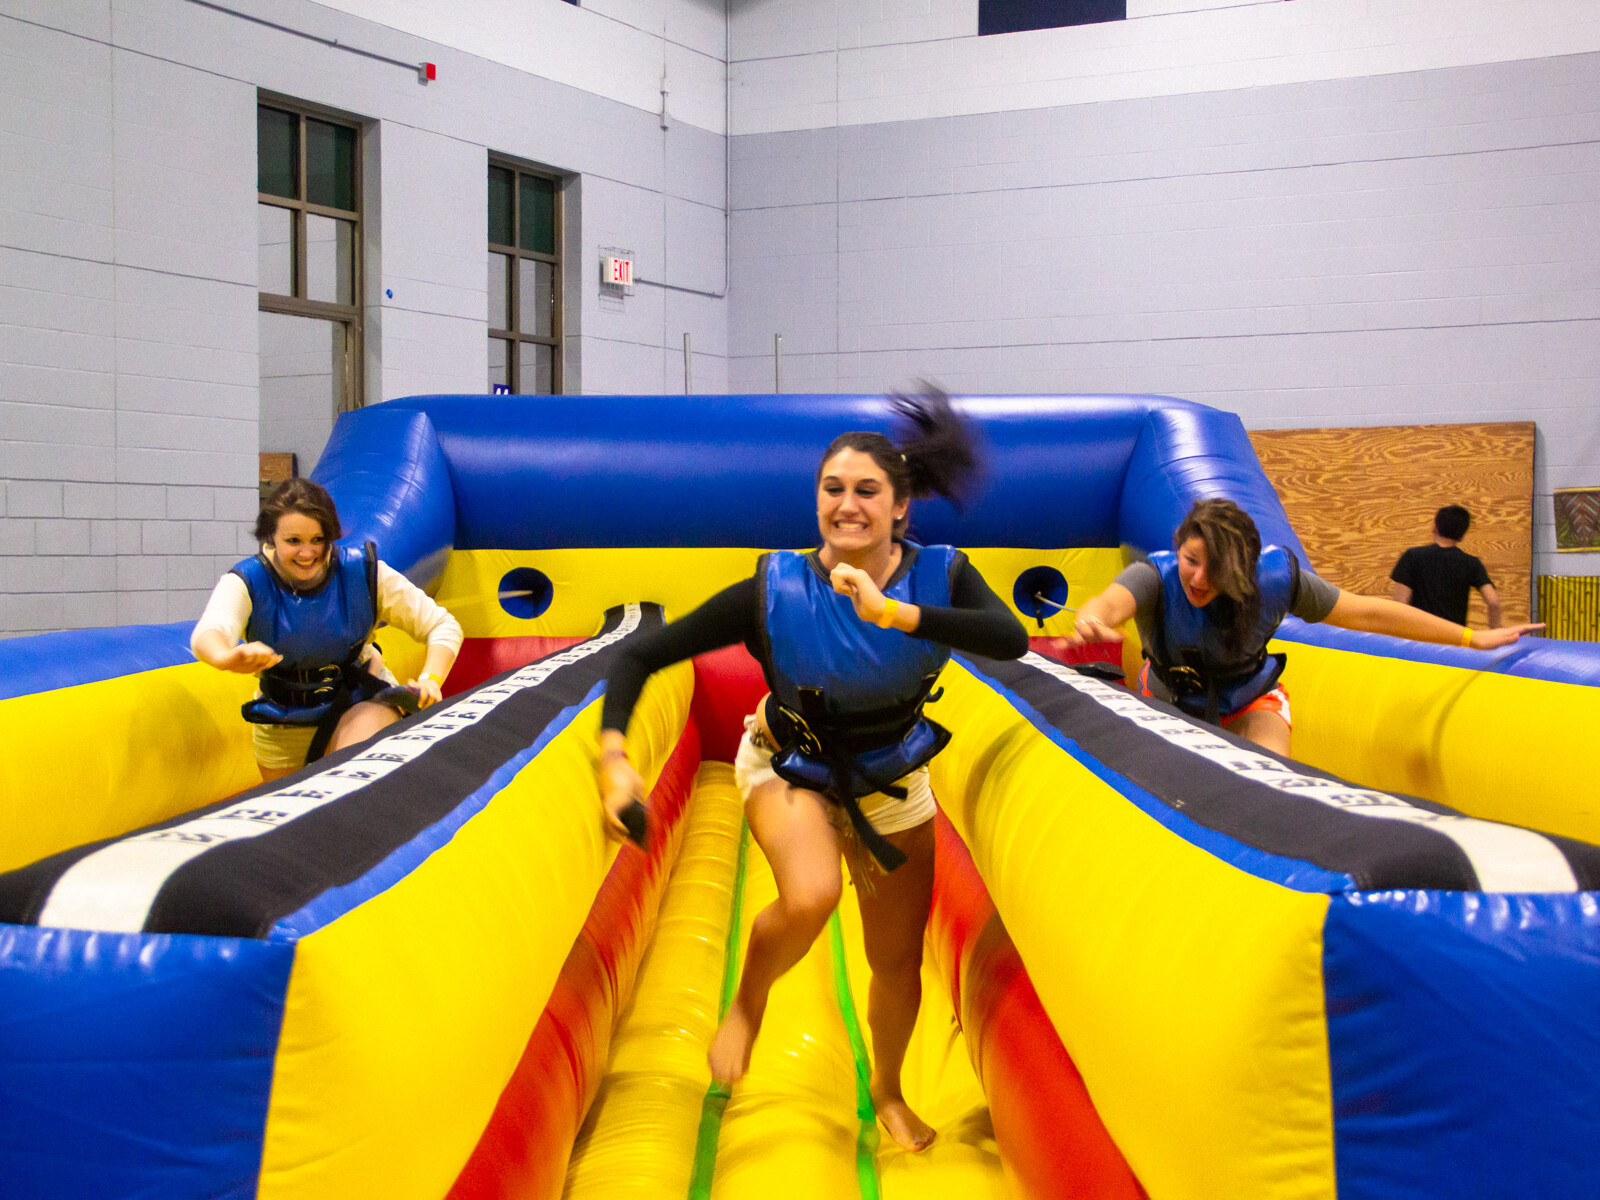 A group of friends smiling, running and having fun on an inflatable bungee run.